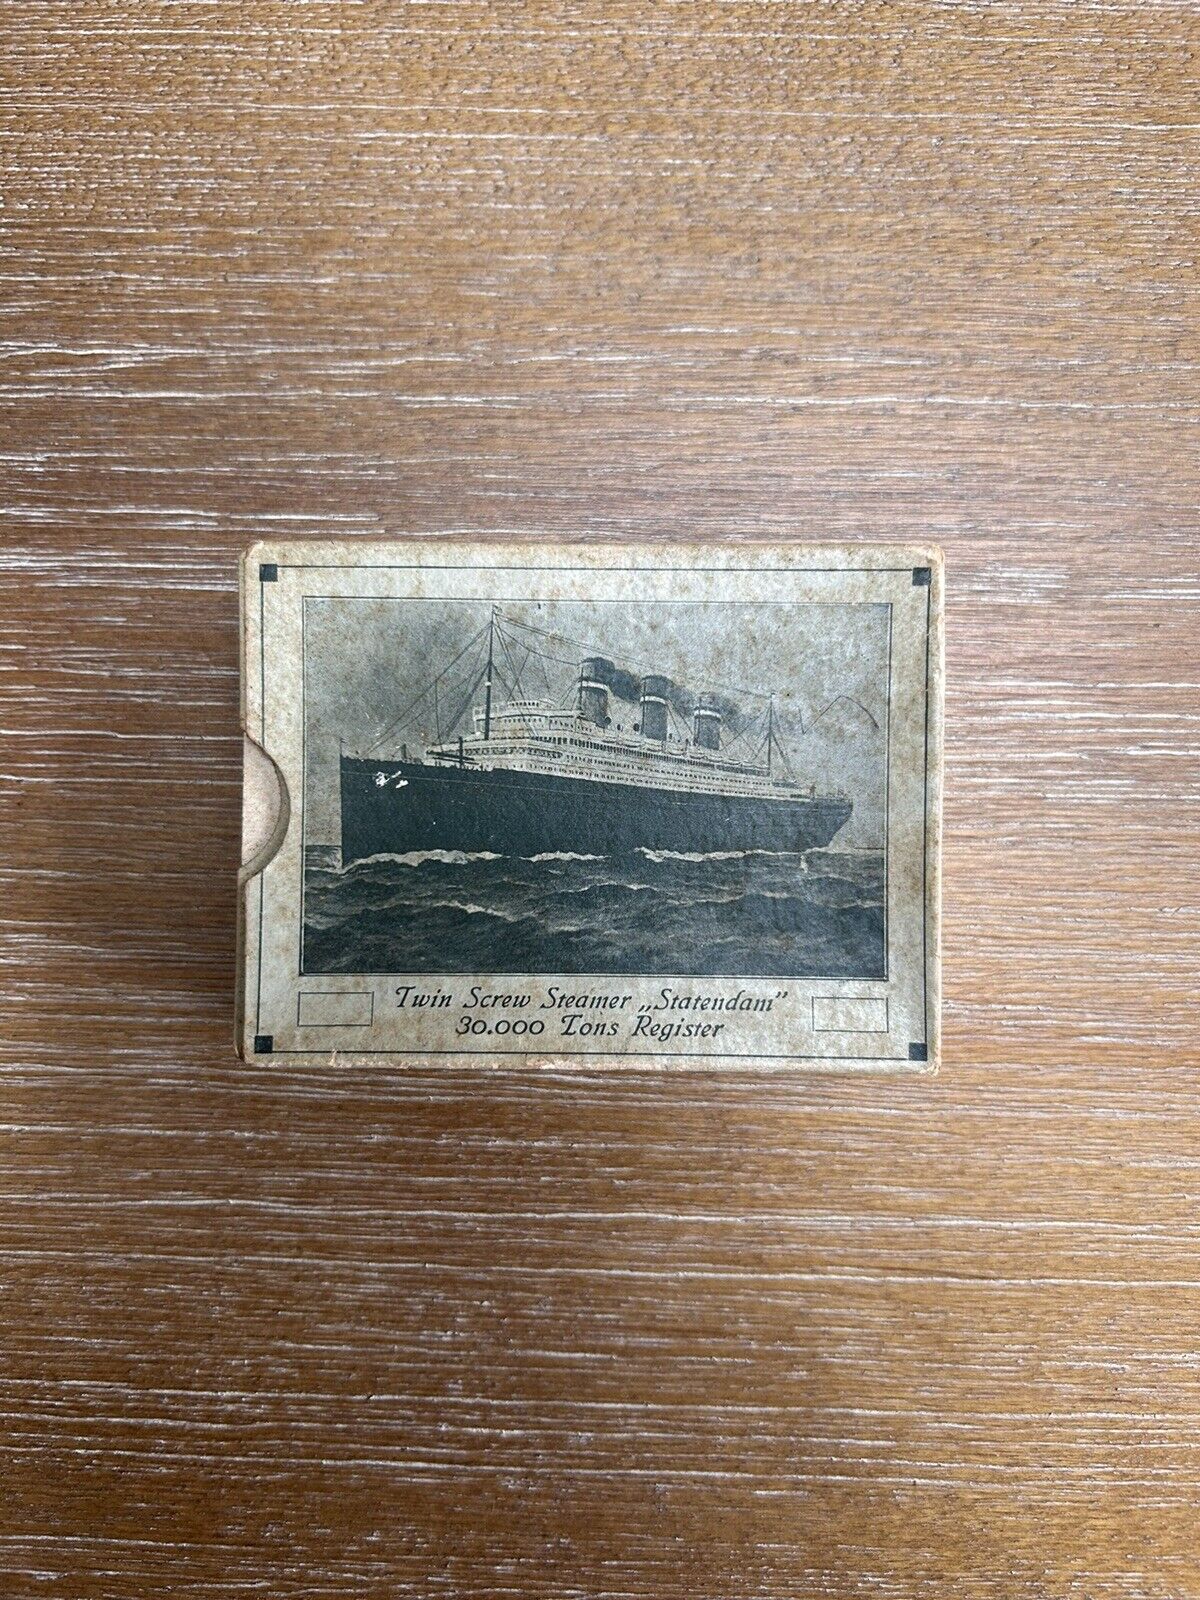 Antique Deck Of Playing Cards From The 1920’s Steamer Statendam